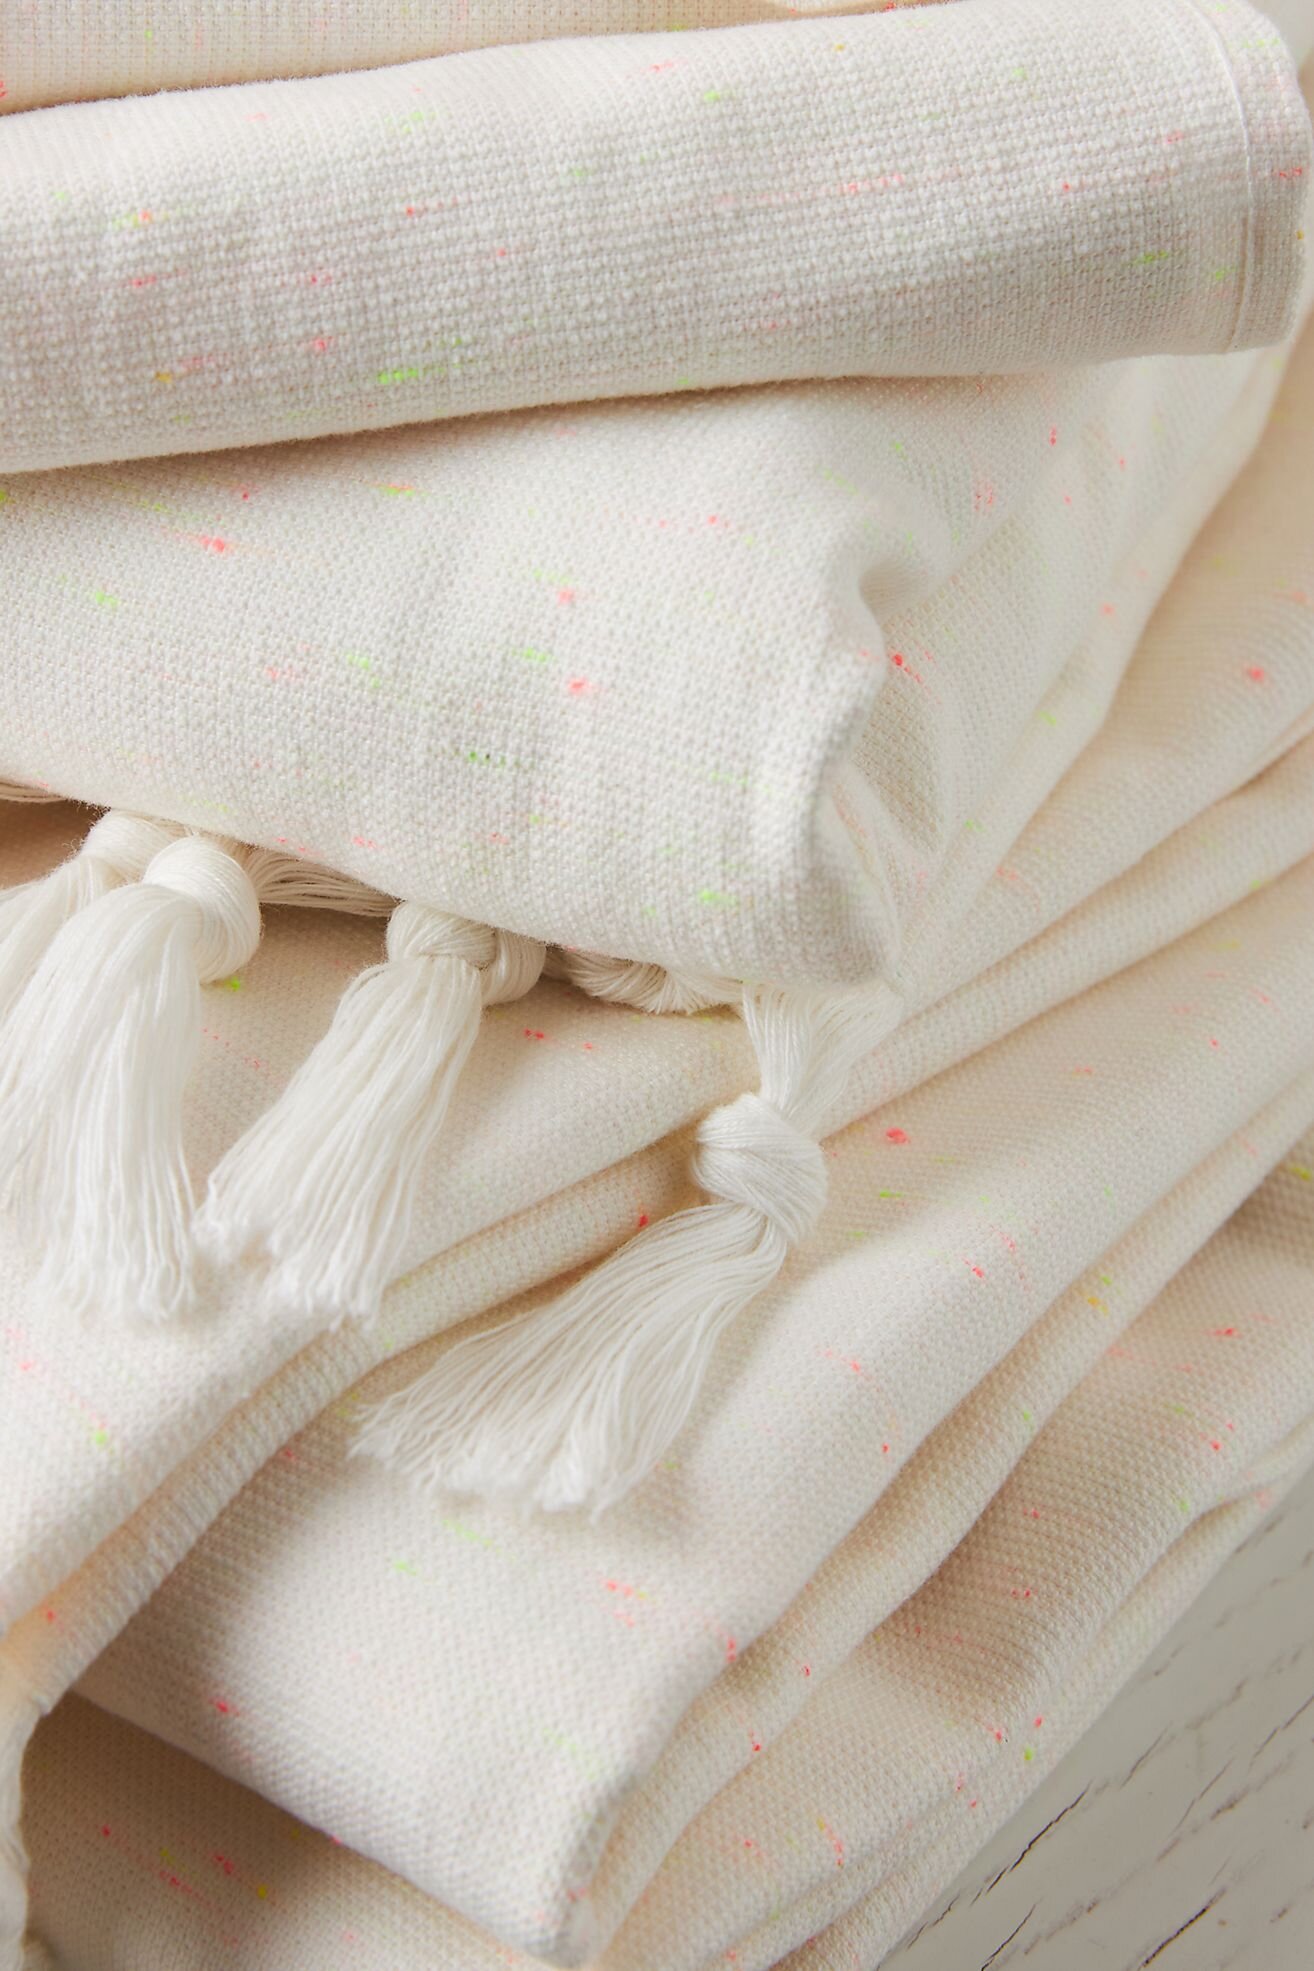 Speckled Towels